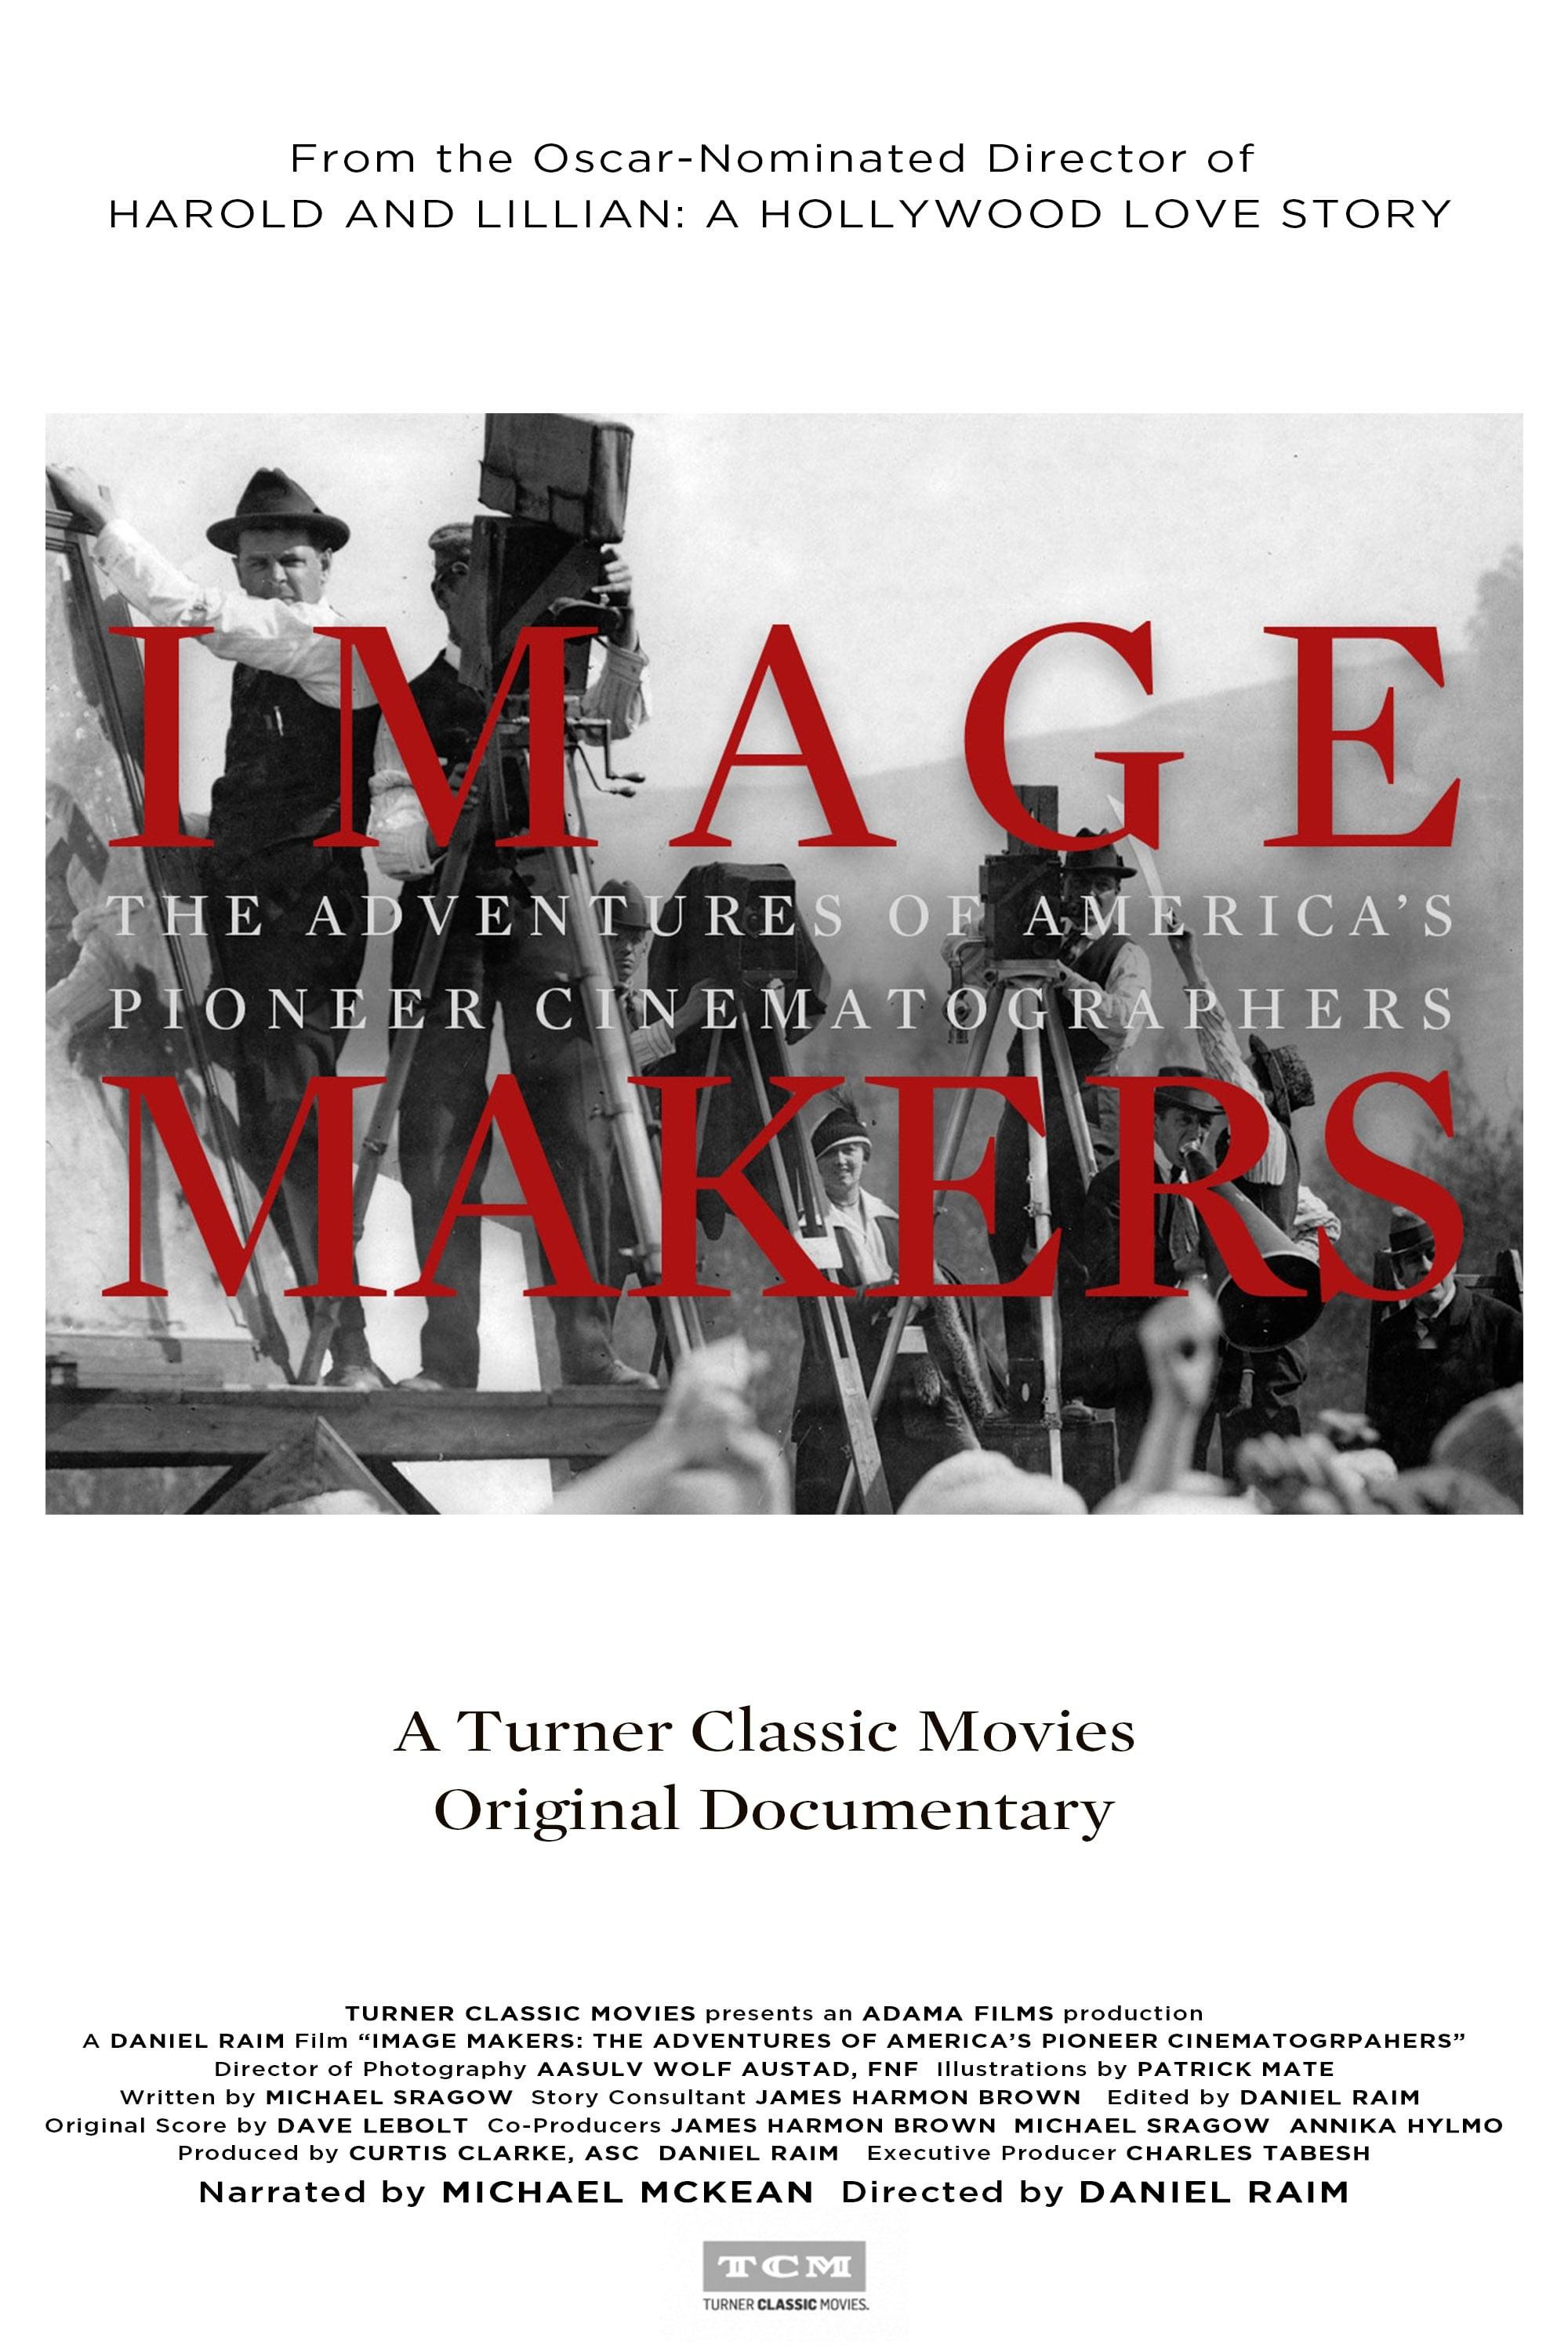 Image Makers: The Adventures of America's Pioneer Cinematographers poster